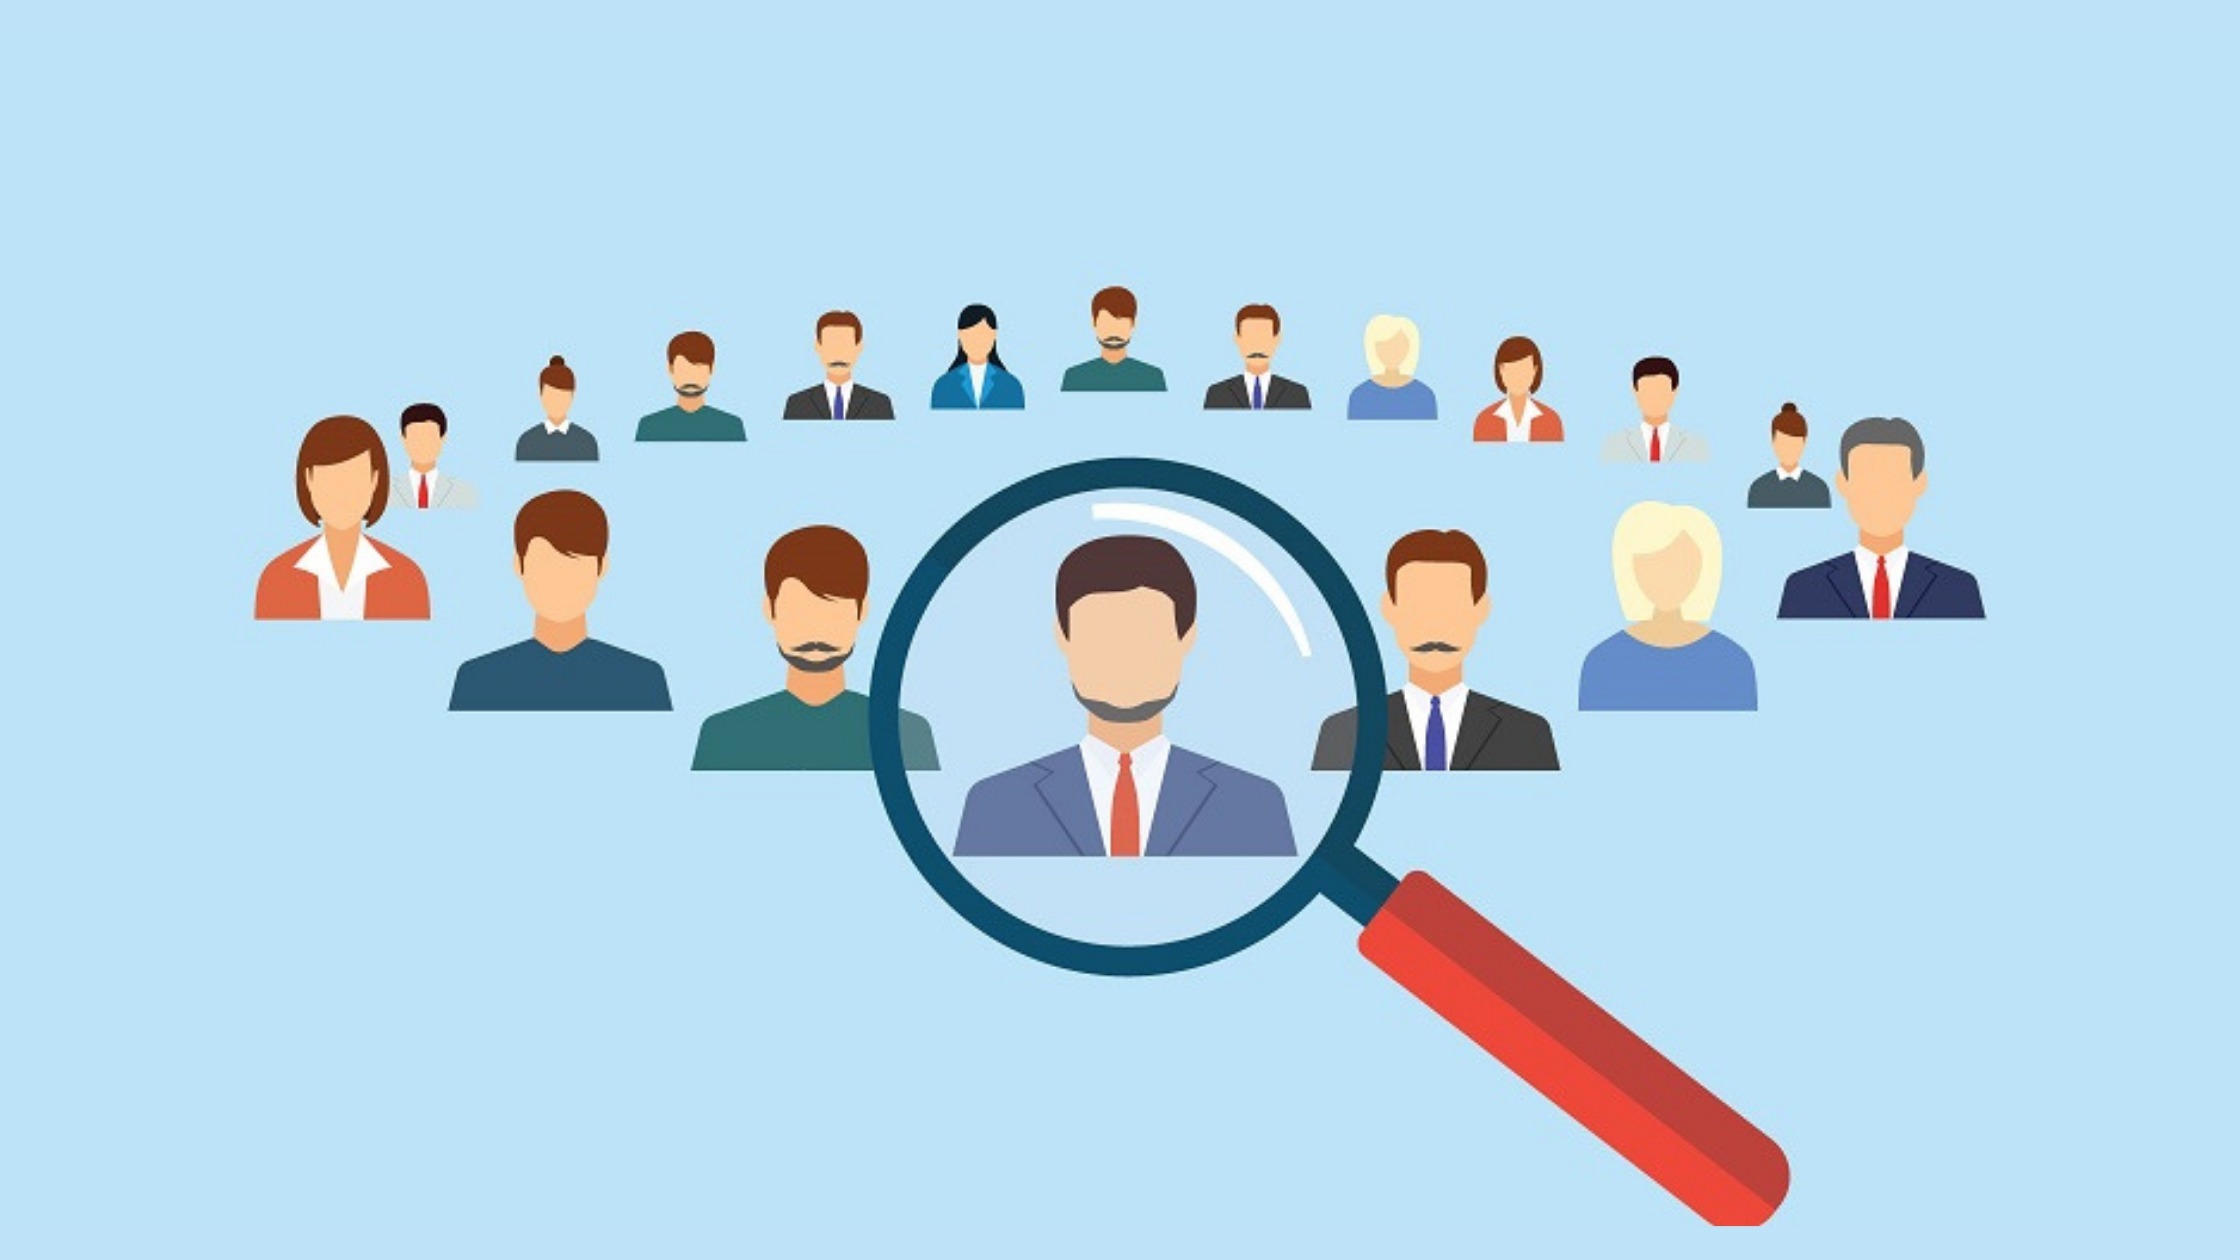 For_Sourcing_of_Candidates_Recruiter_Use_These_7_Ways